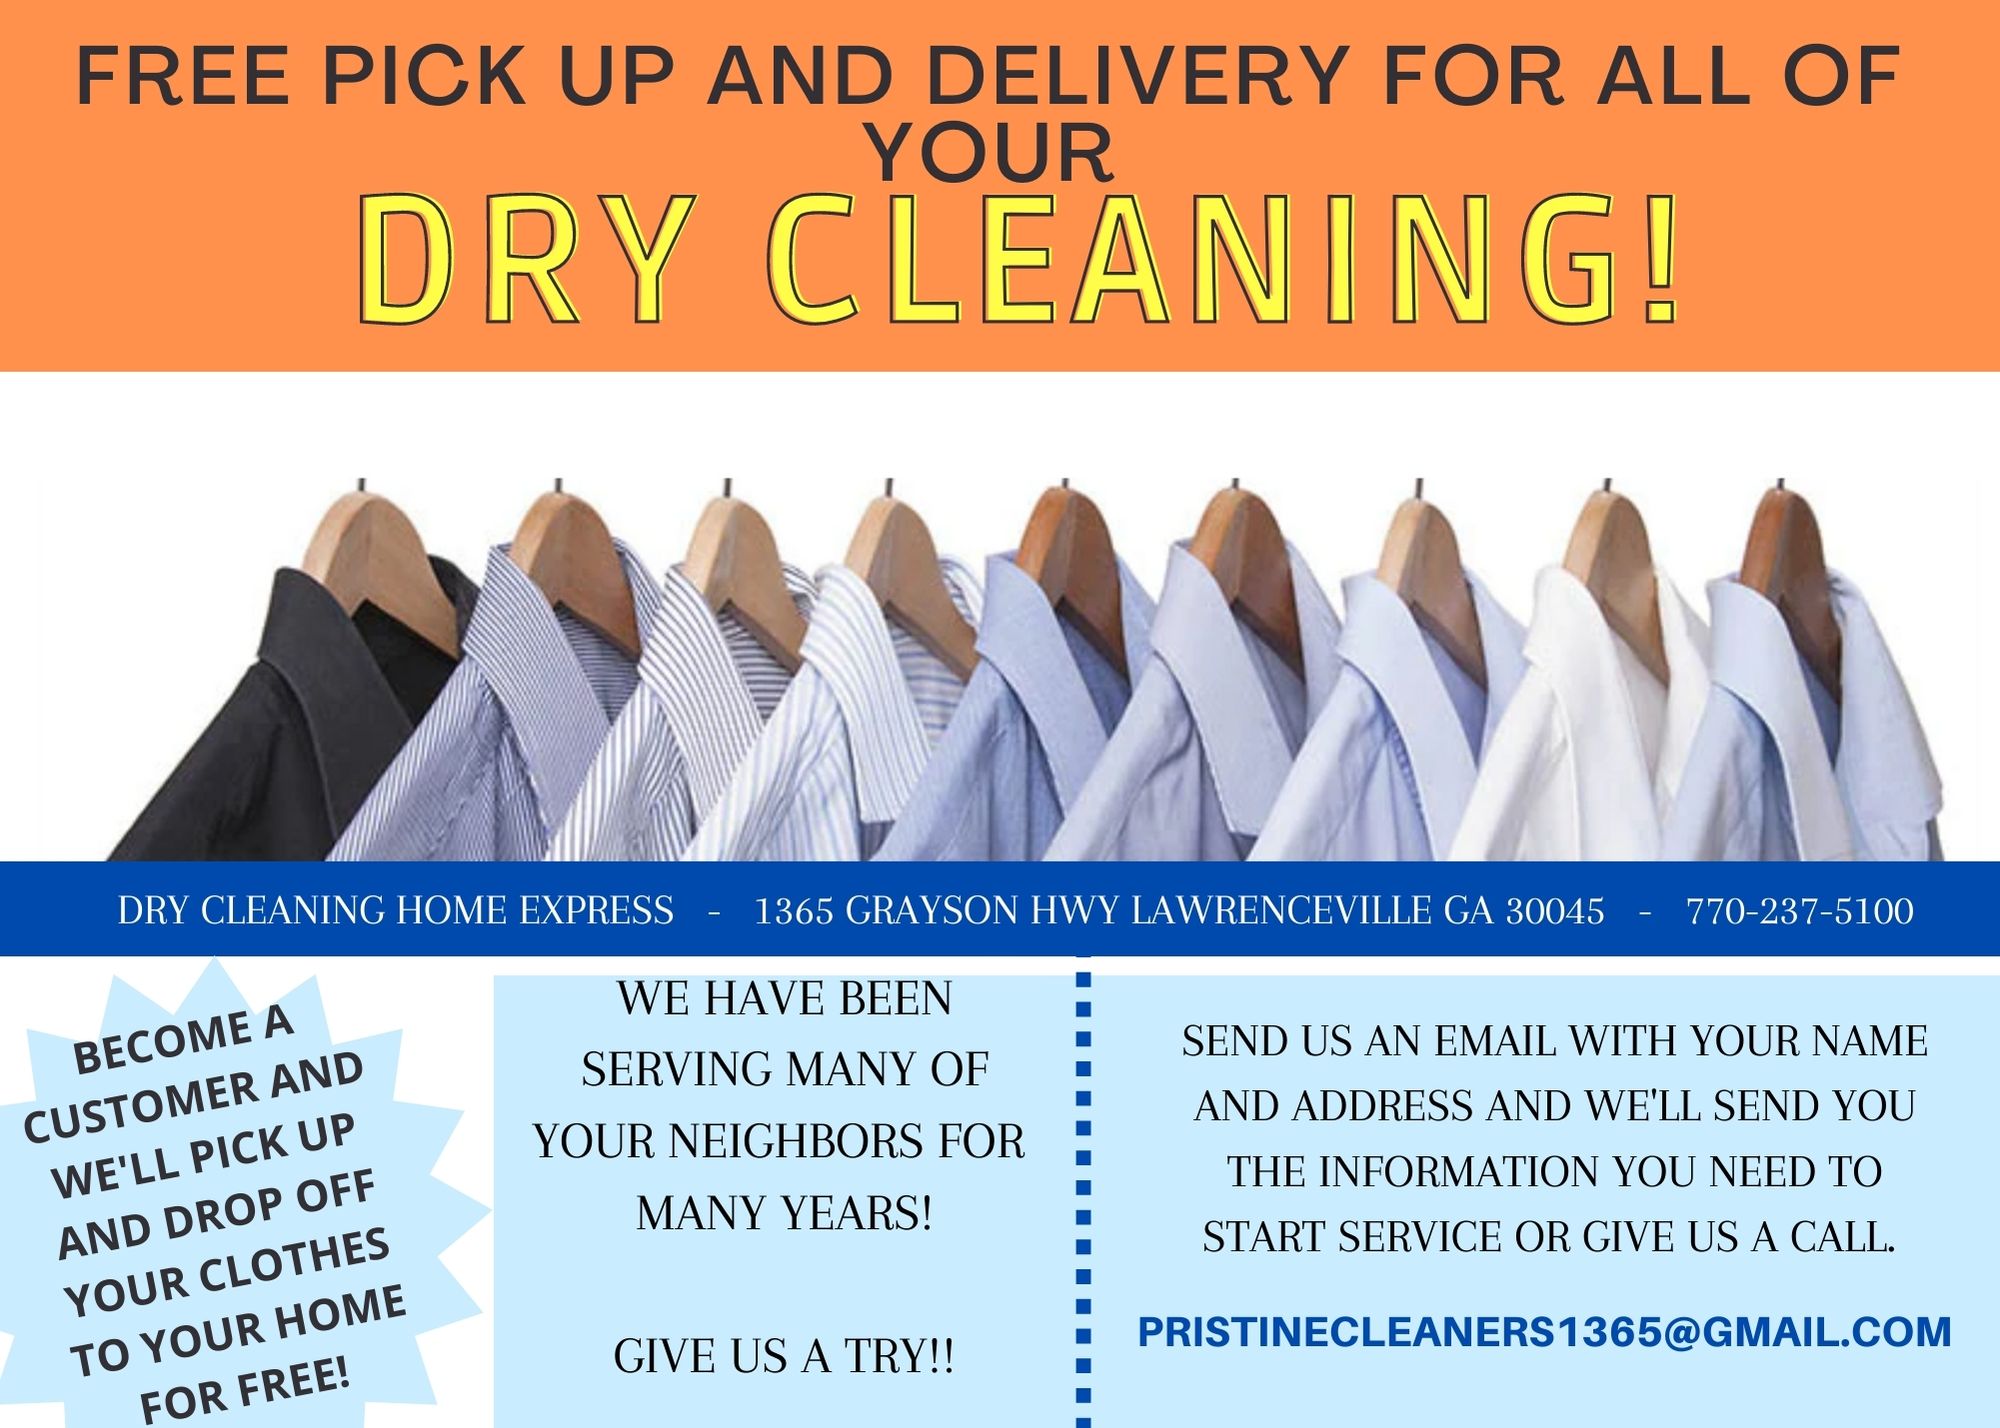 Pristine Cleaners / Dry Cleaning Home Express